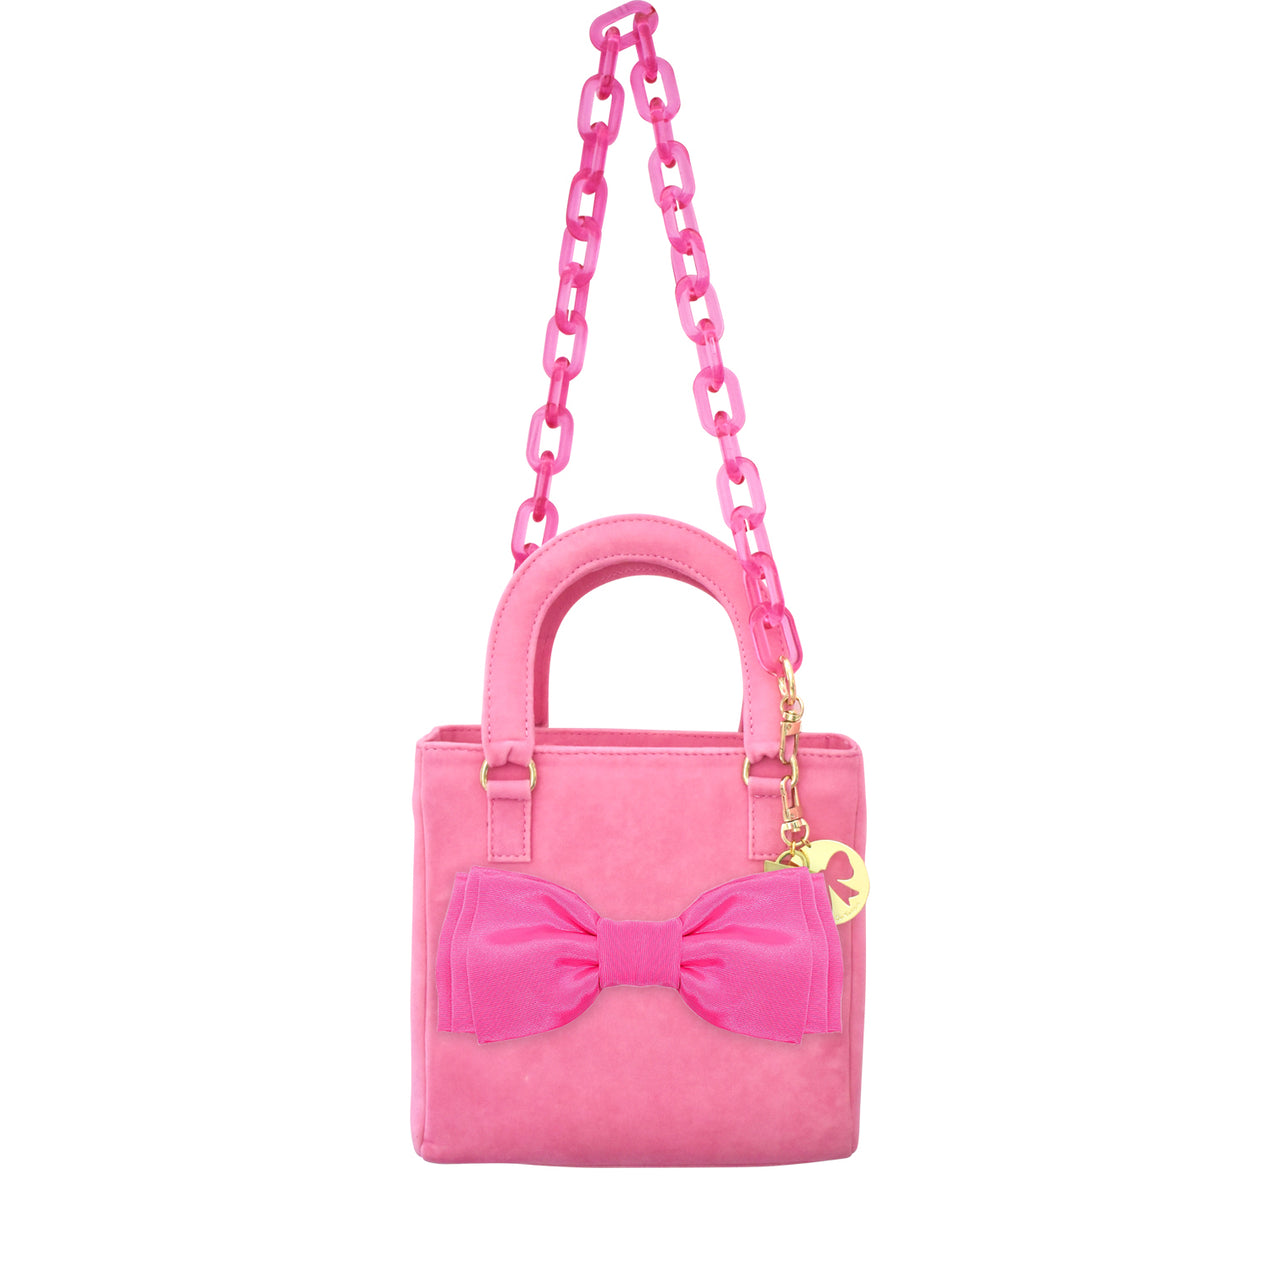 The Luxe Worth Handbag with Interchangeable Bows & Flowers